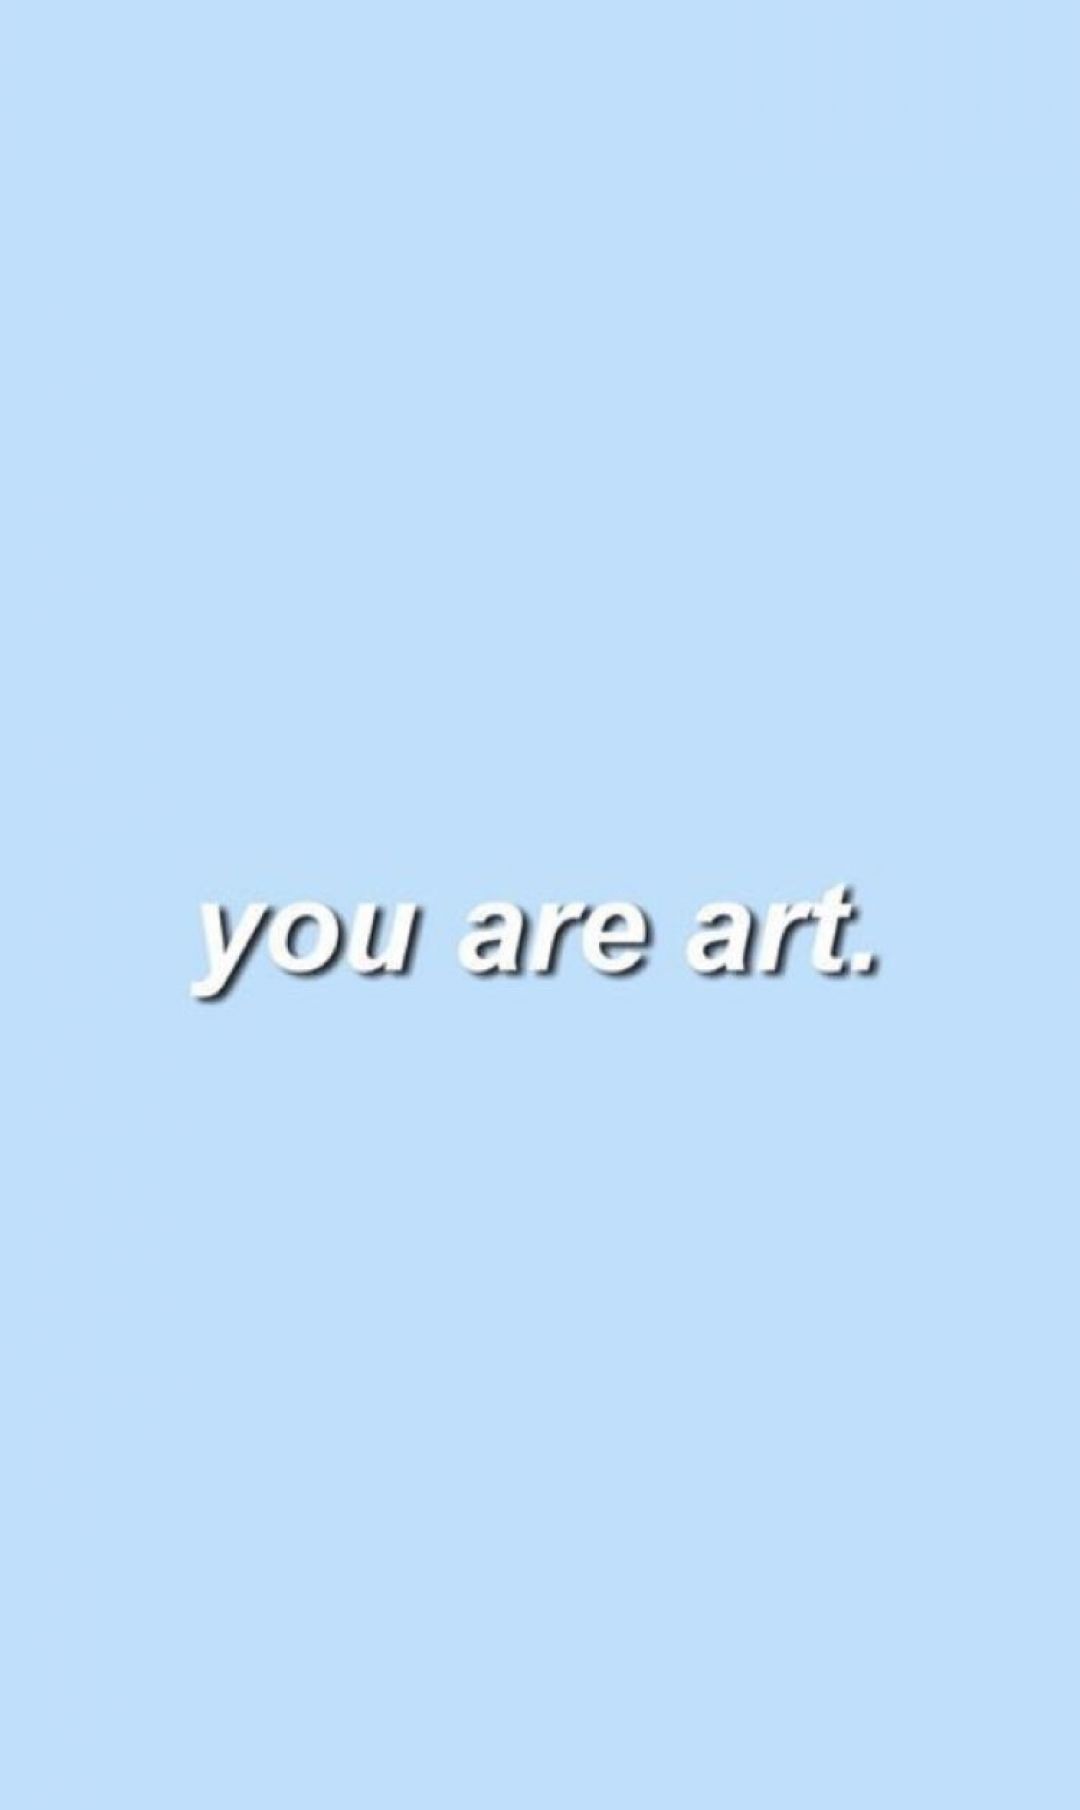 You are art. - Quotes, art